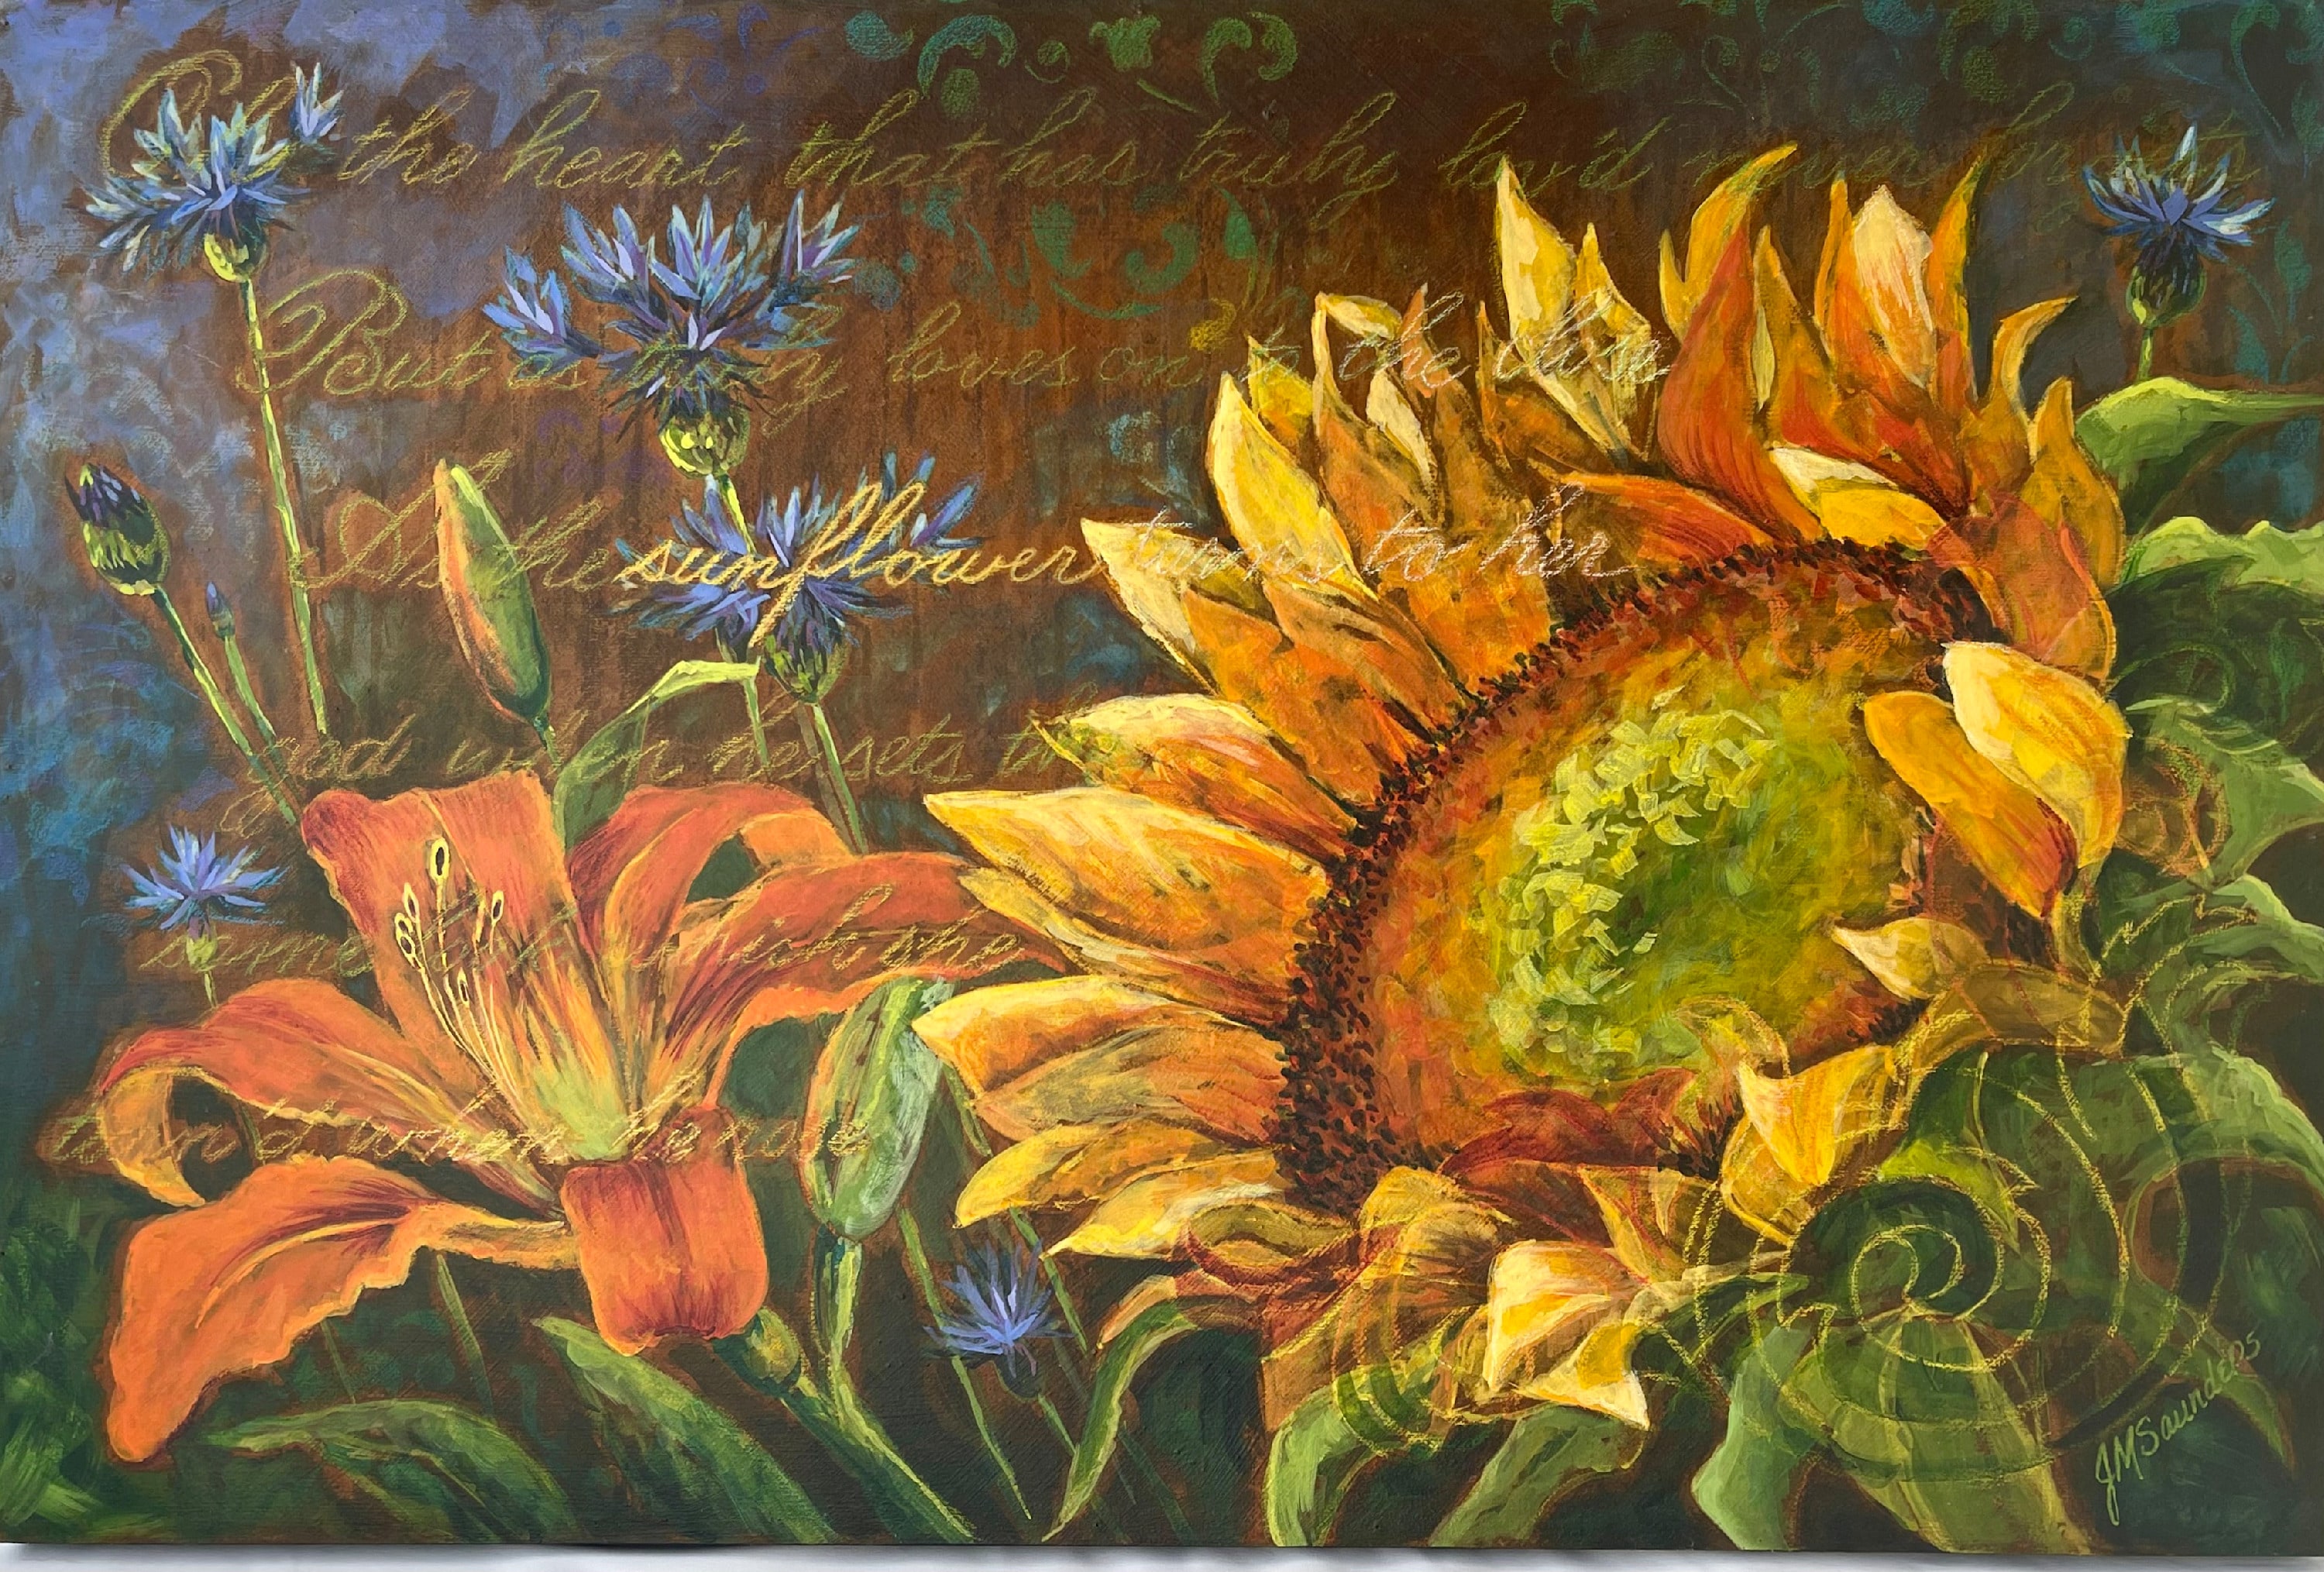 
        <div class='title'>
          As the Sunflower Turns 36x24 $660
        </div>
       
        <div class='description'>
          Sunflower, Day Lily & cornflowers with scripted  lyrics
        </div>
      